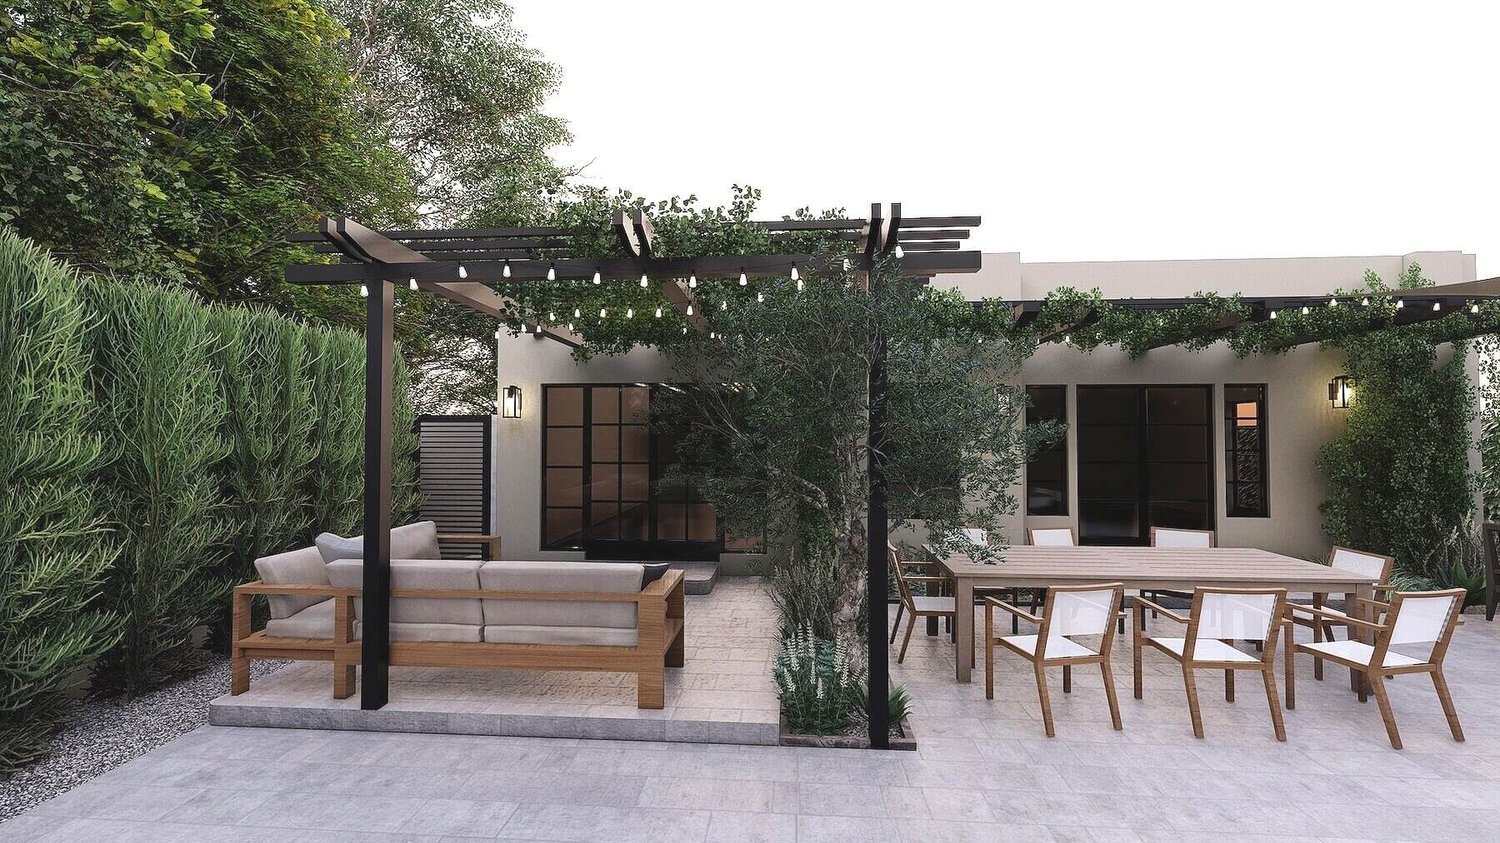 Los Angeles concrete paver backyard showing pergola with climbing plants over paver patio seating area, gravel, plants and dining area